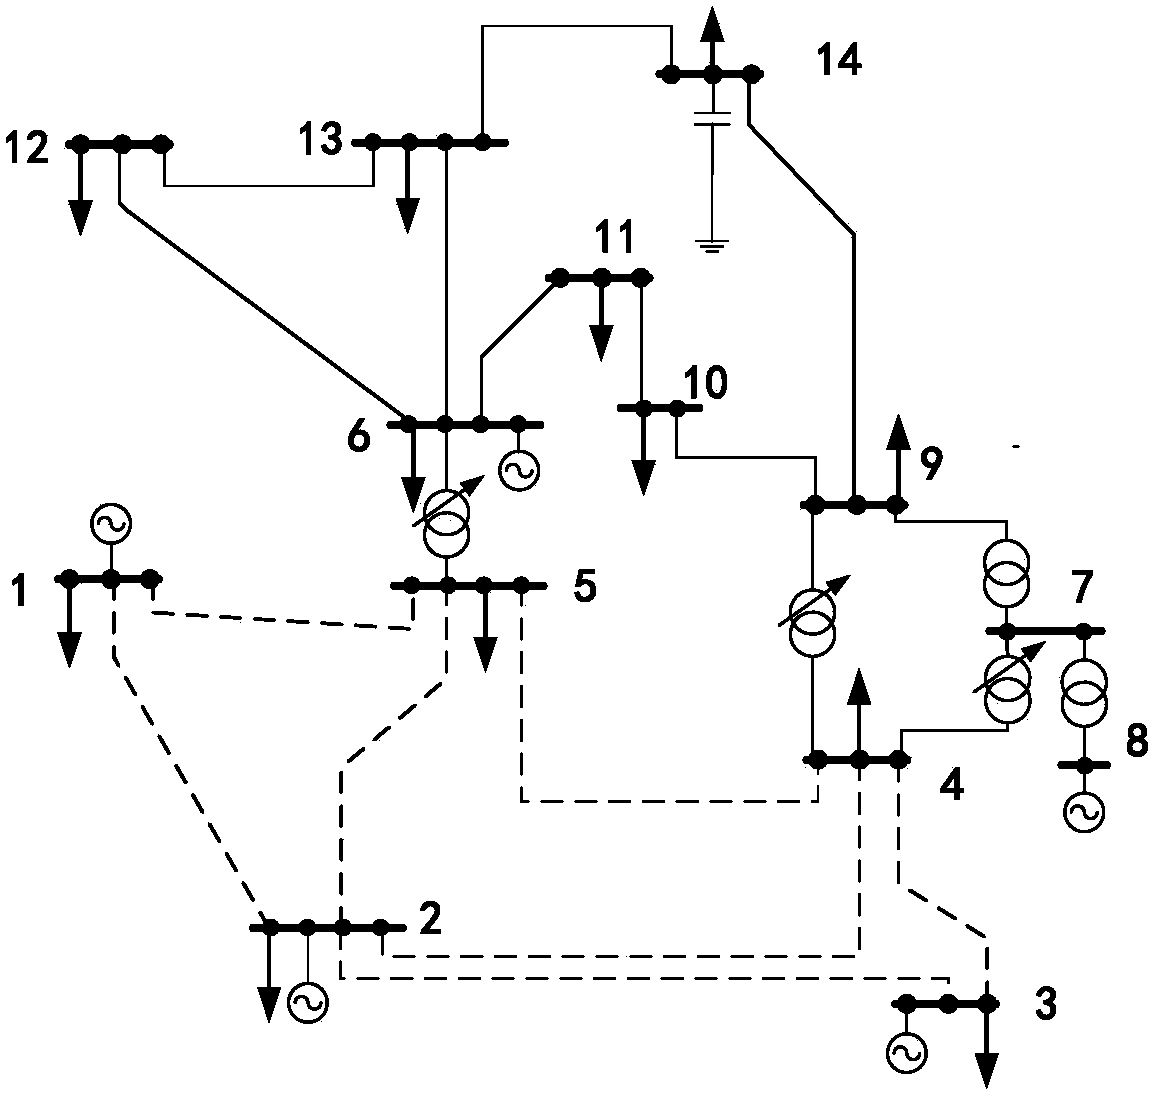 Security constrained optimal power flow method based on power flow transfer relation